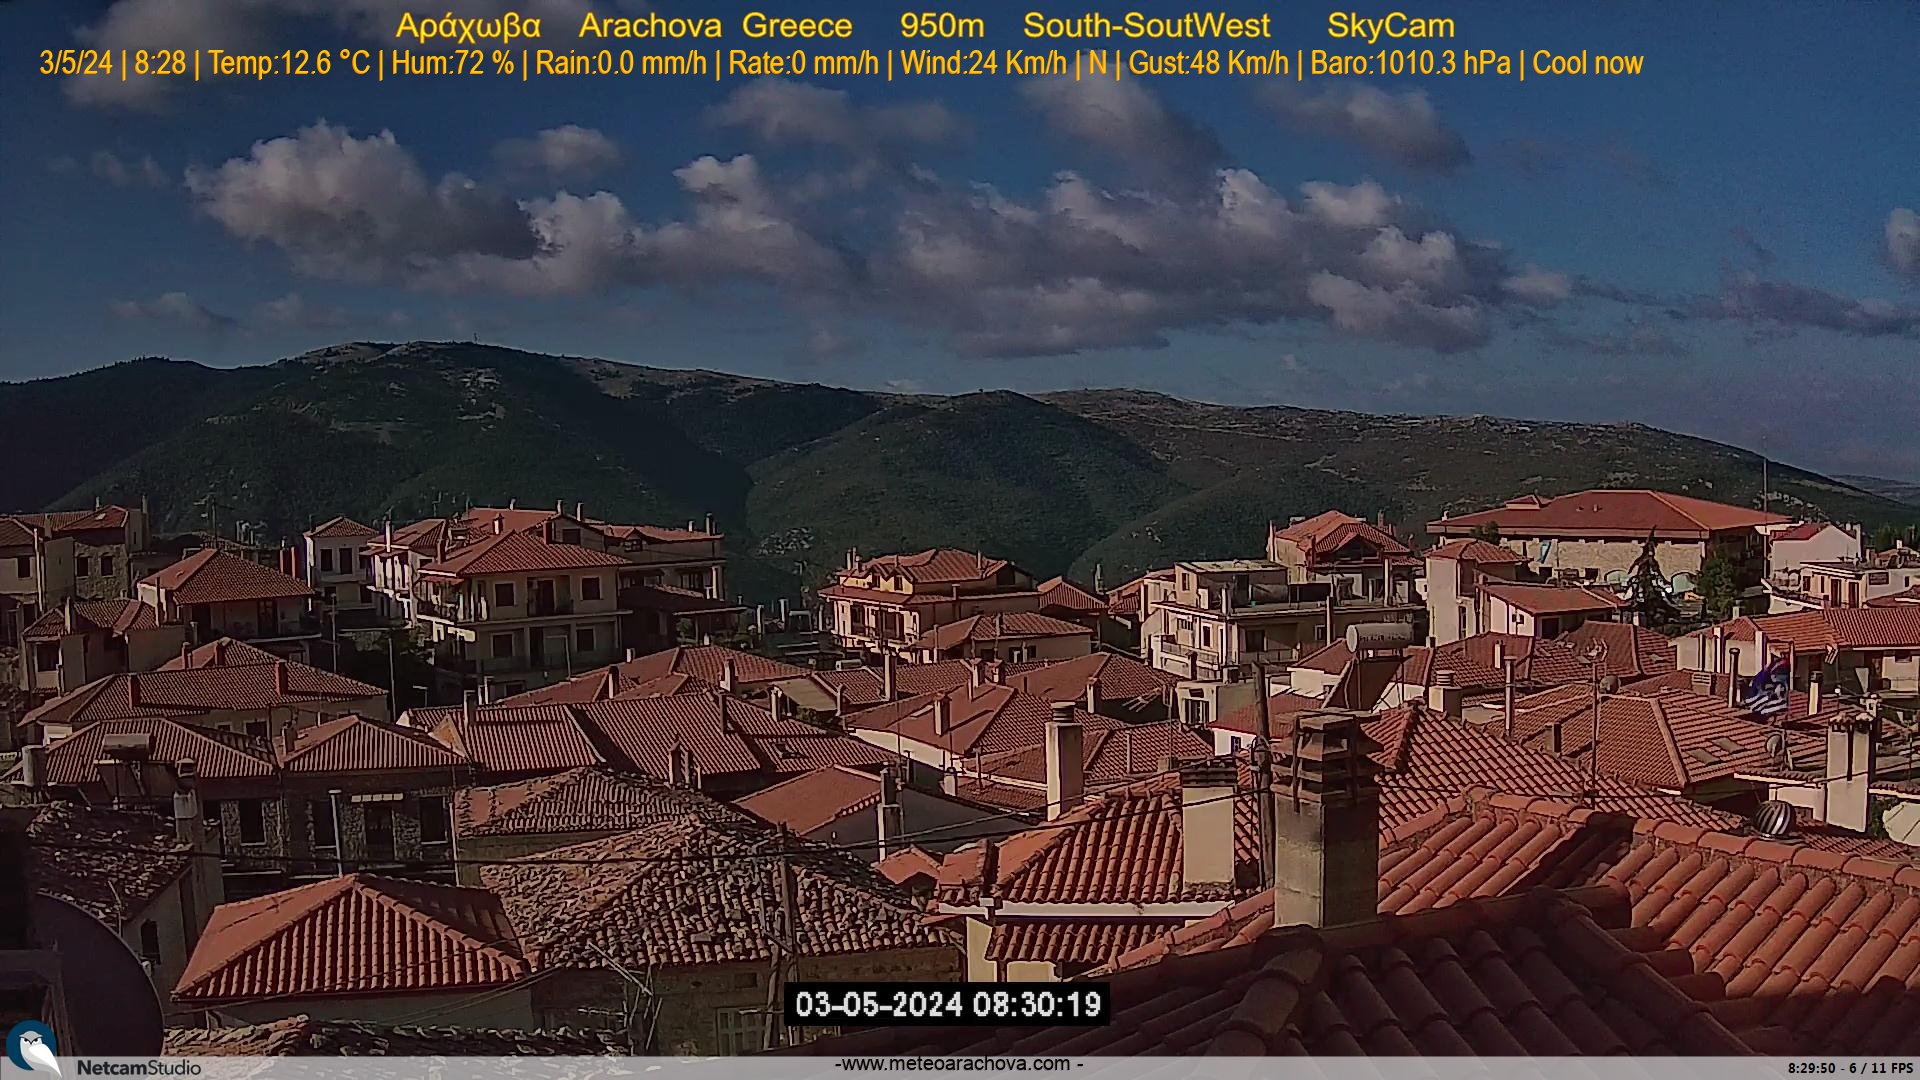 Current Weather Conditions at Arachova, Parnassos, Greece